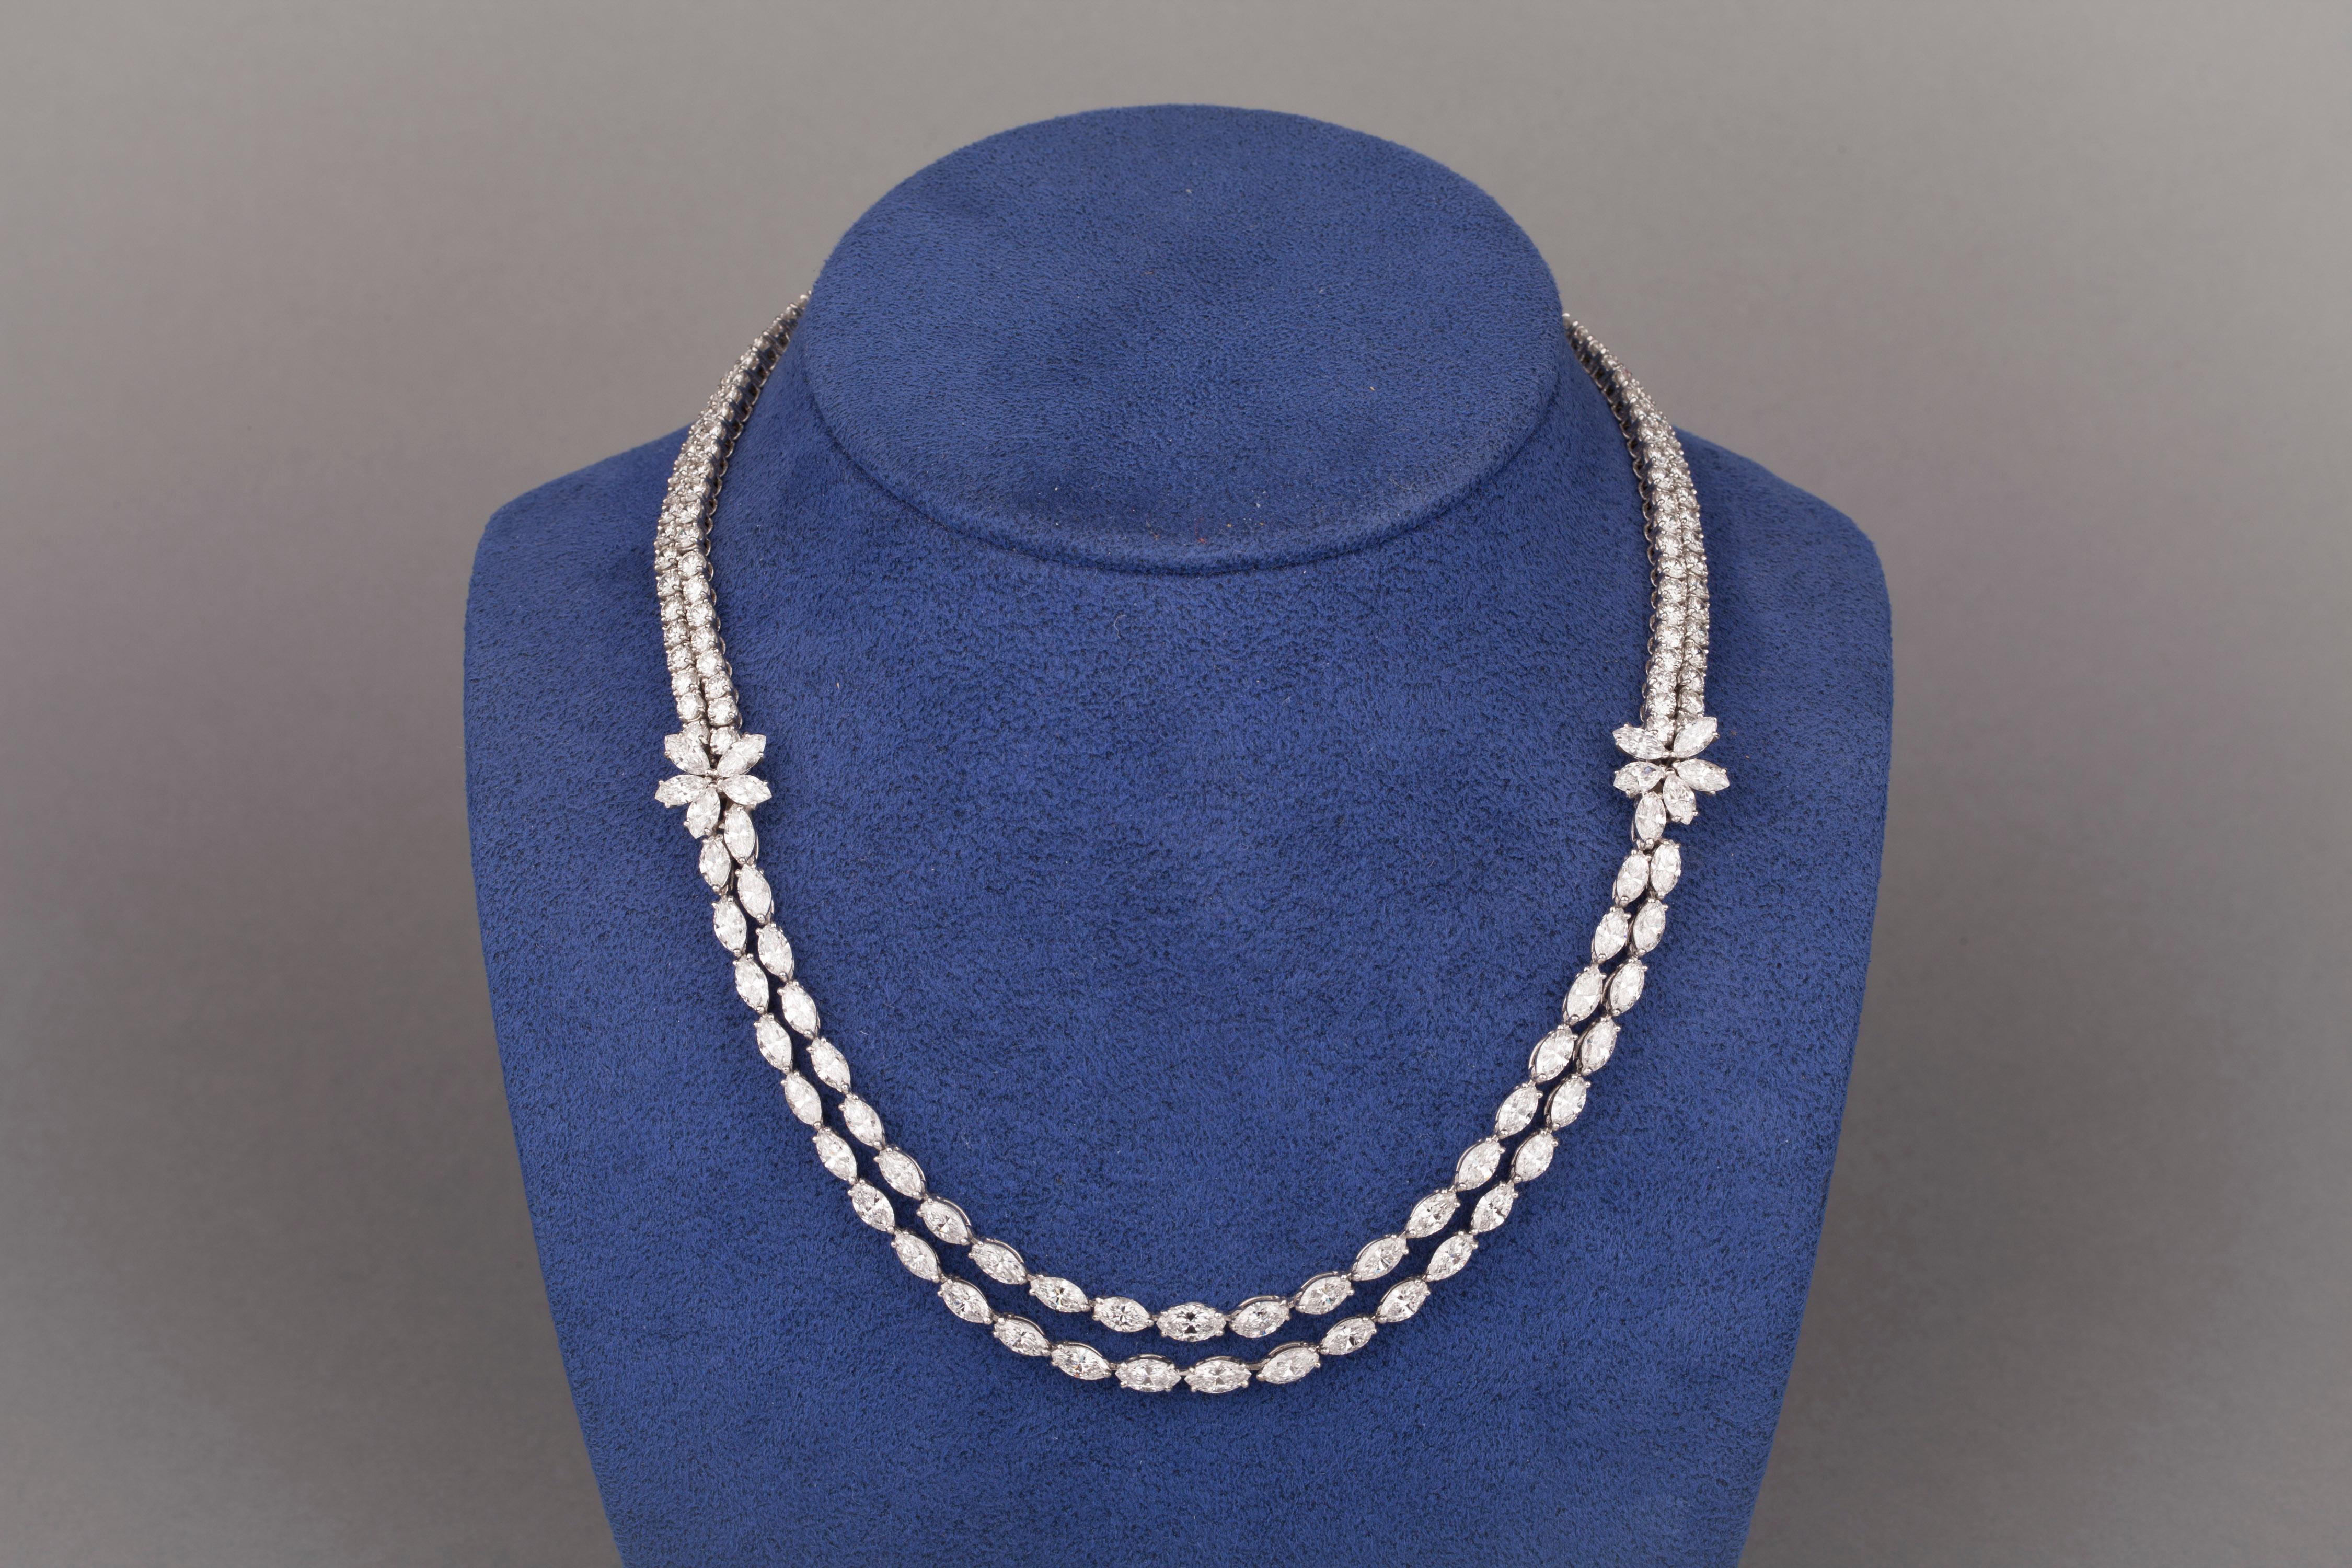 Platinum  and 30 Carats Diamonds French Necklace

Wonderful necklace, made in France circa 1960.  The craft is quality. 
The necklace is heavy: 75.30 grams. 
The diamonds weights 30 carats estimate. 
146* 0.11: (16.06) + 56 * 0.25 : (14) = 30.06